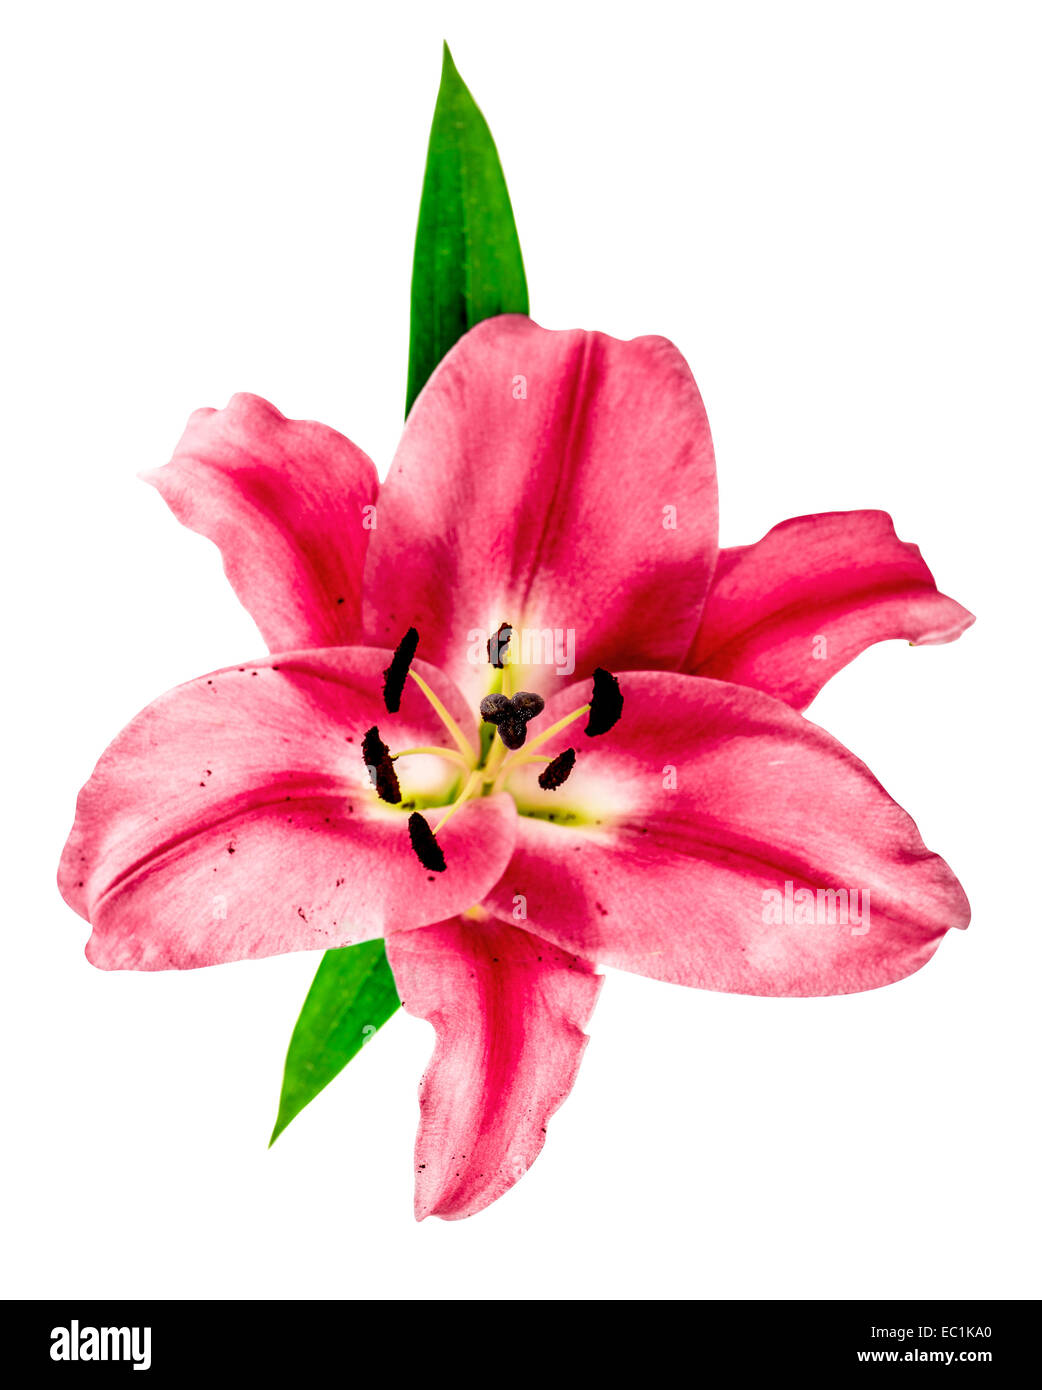 pink lily blossom isolated on white background. fresh flower head Stock Photo